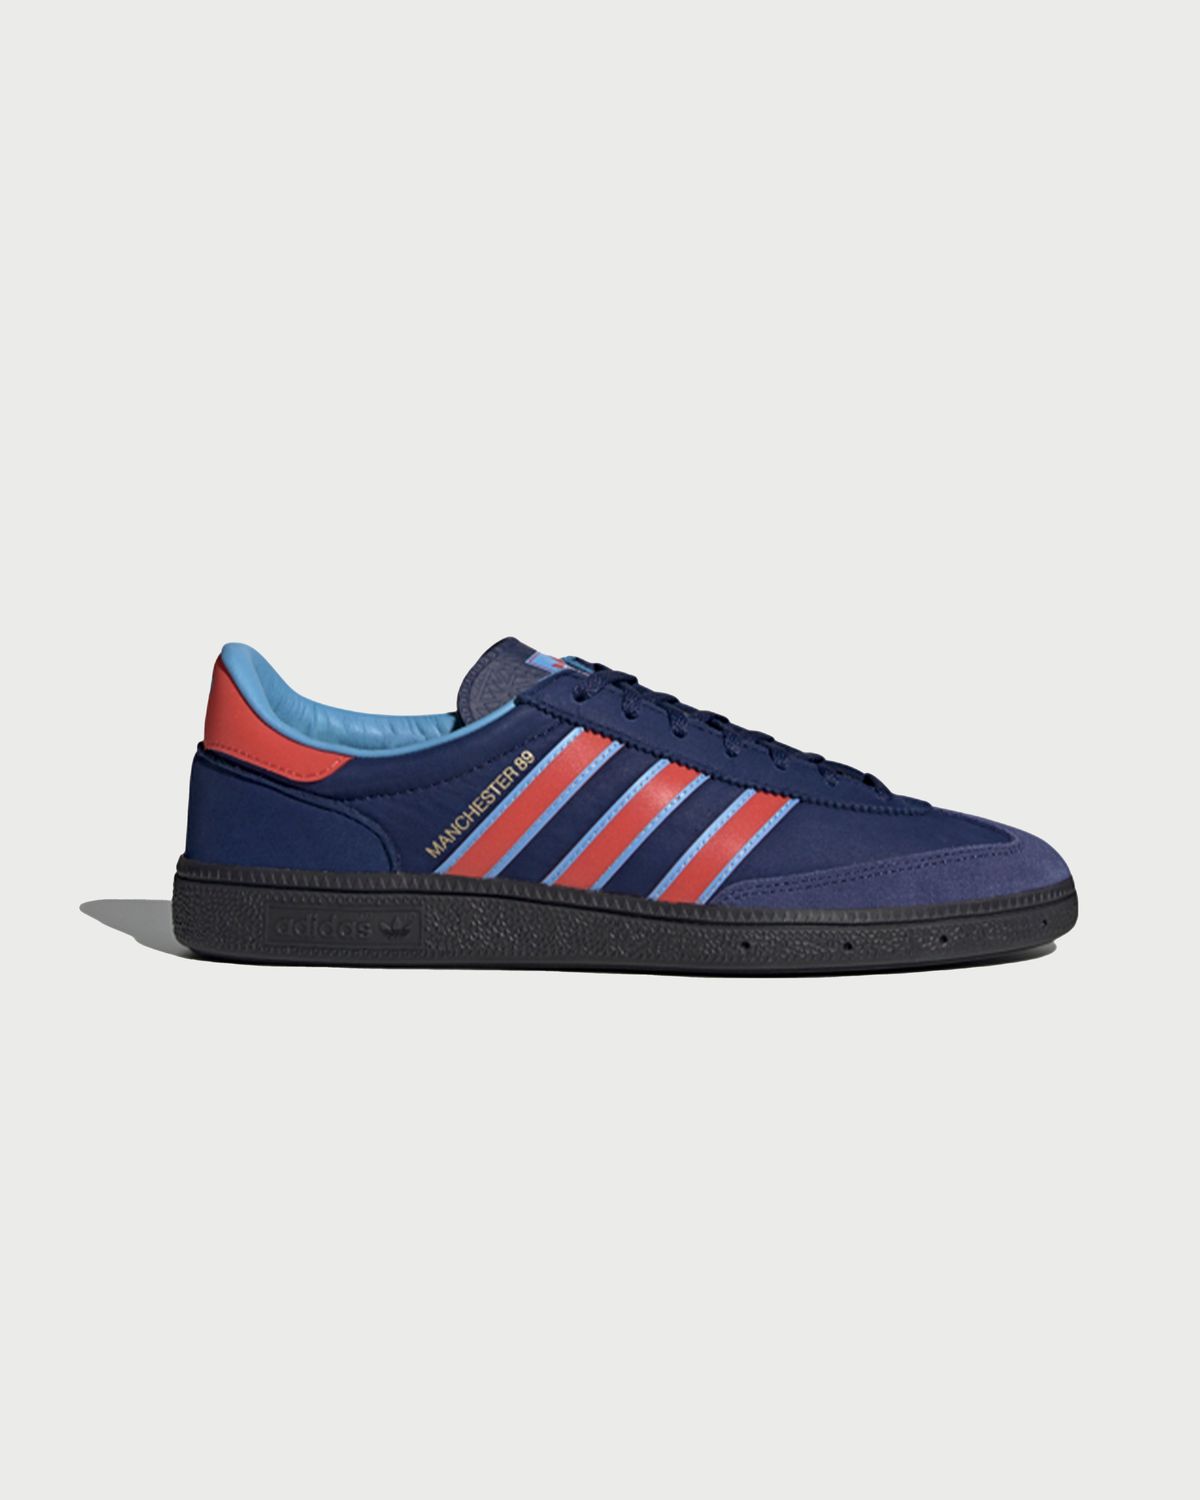 Adidas – Spezial Manchester 89 Trainer Navy - Sneakers - Blue - Image 1